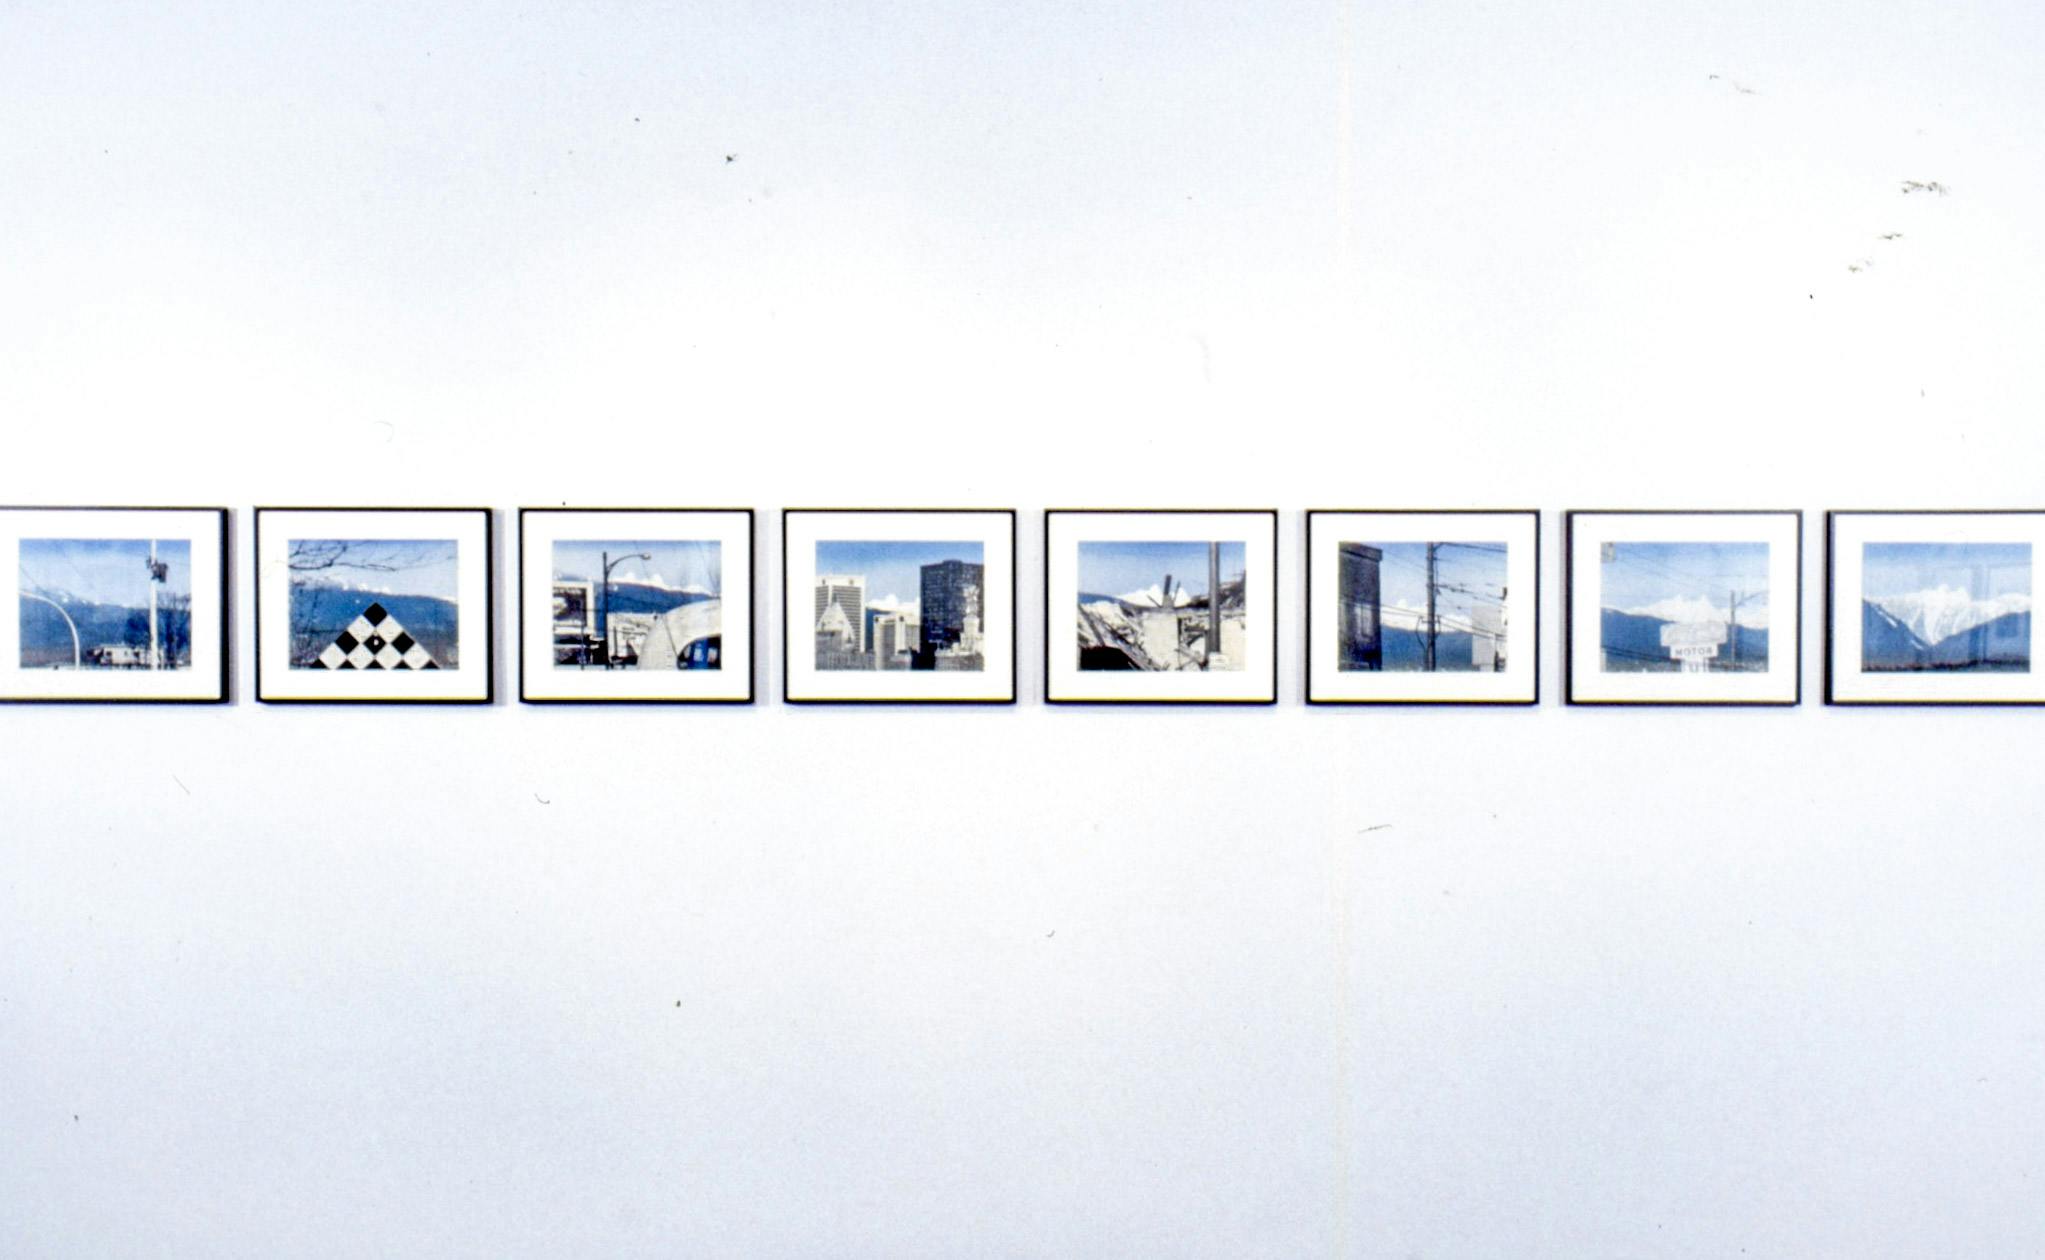 A set of eight coloured drawings are mounted on the wall. Those images are dominated by blue, grey, and white. These depict different scenes of a city foregrounding blue mountains and the sky.